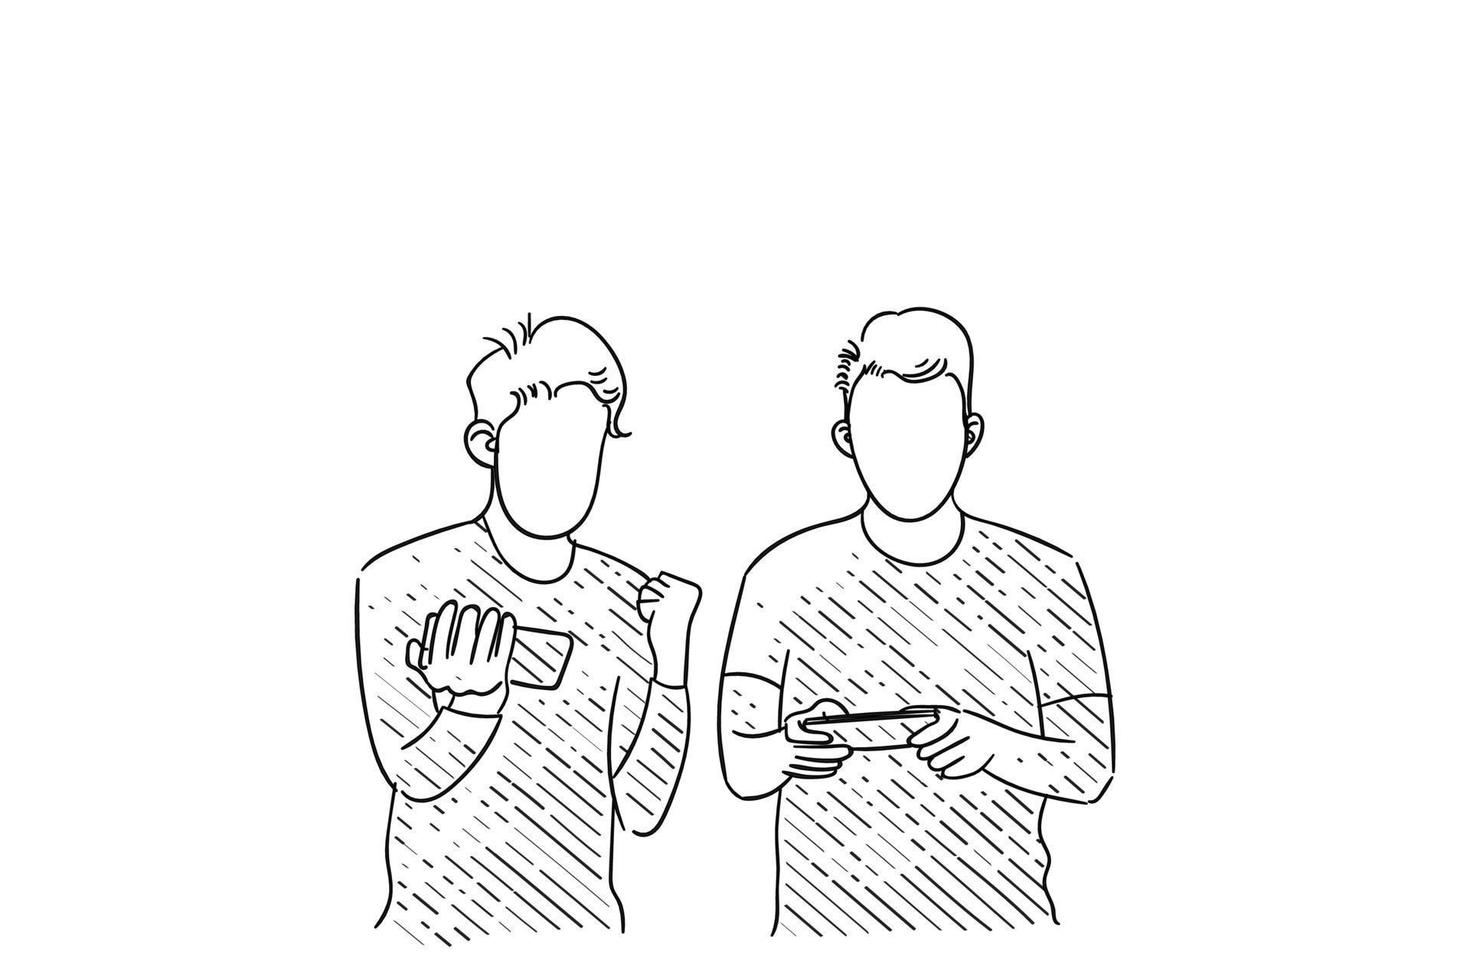 Hand drawn of two man playing game together while standing. Winning in a mobile app game. Vector illustration design